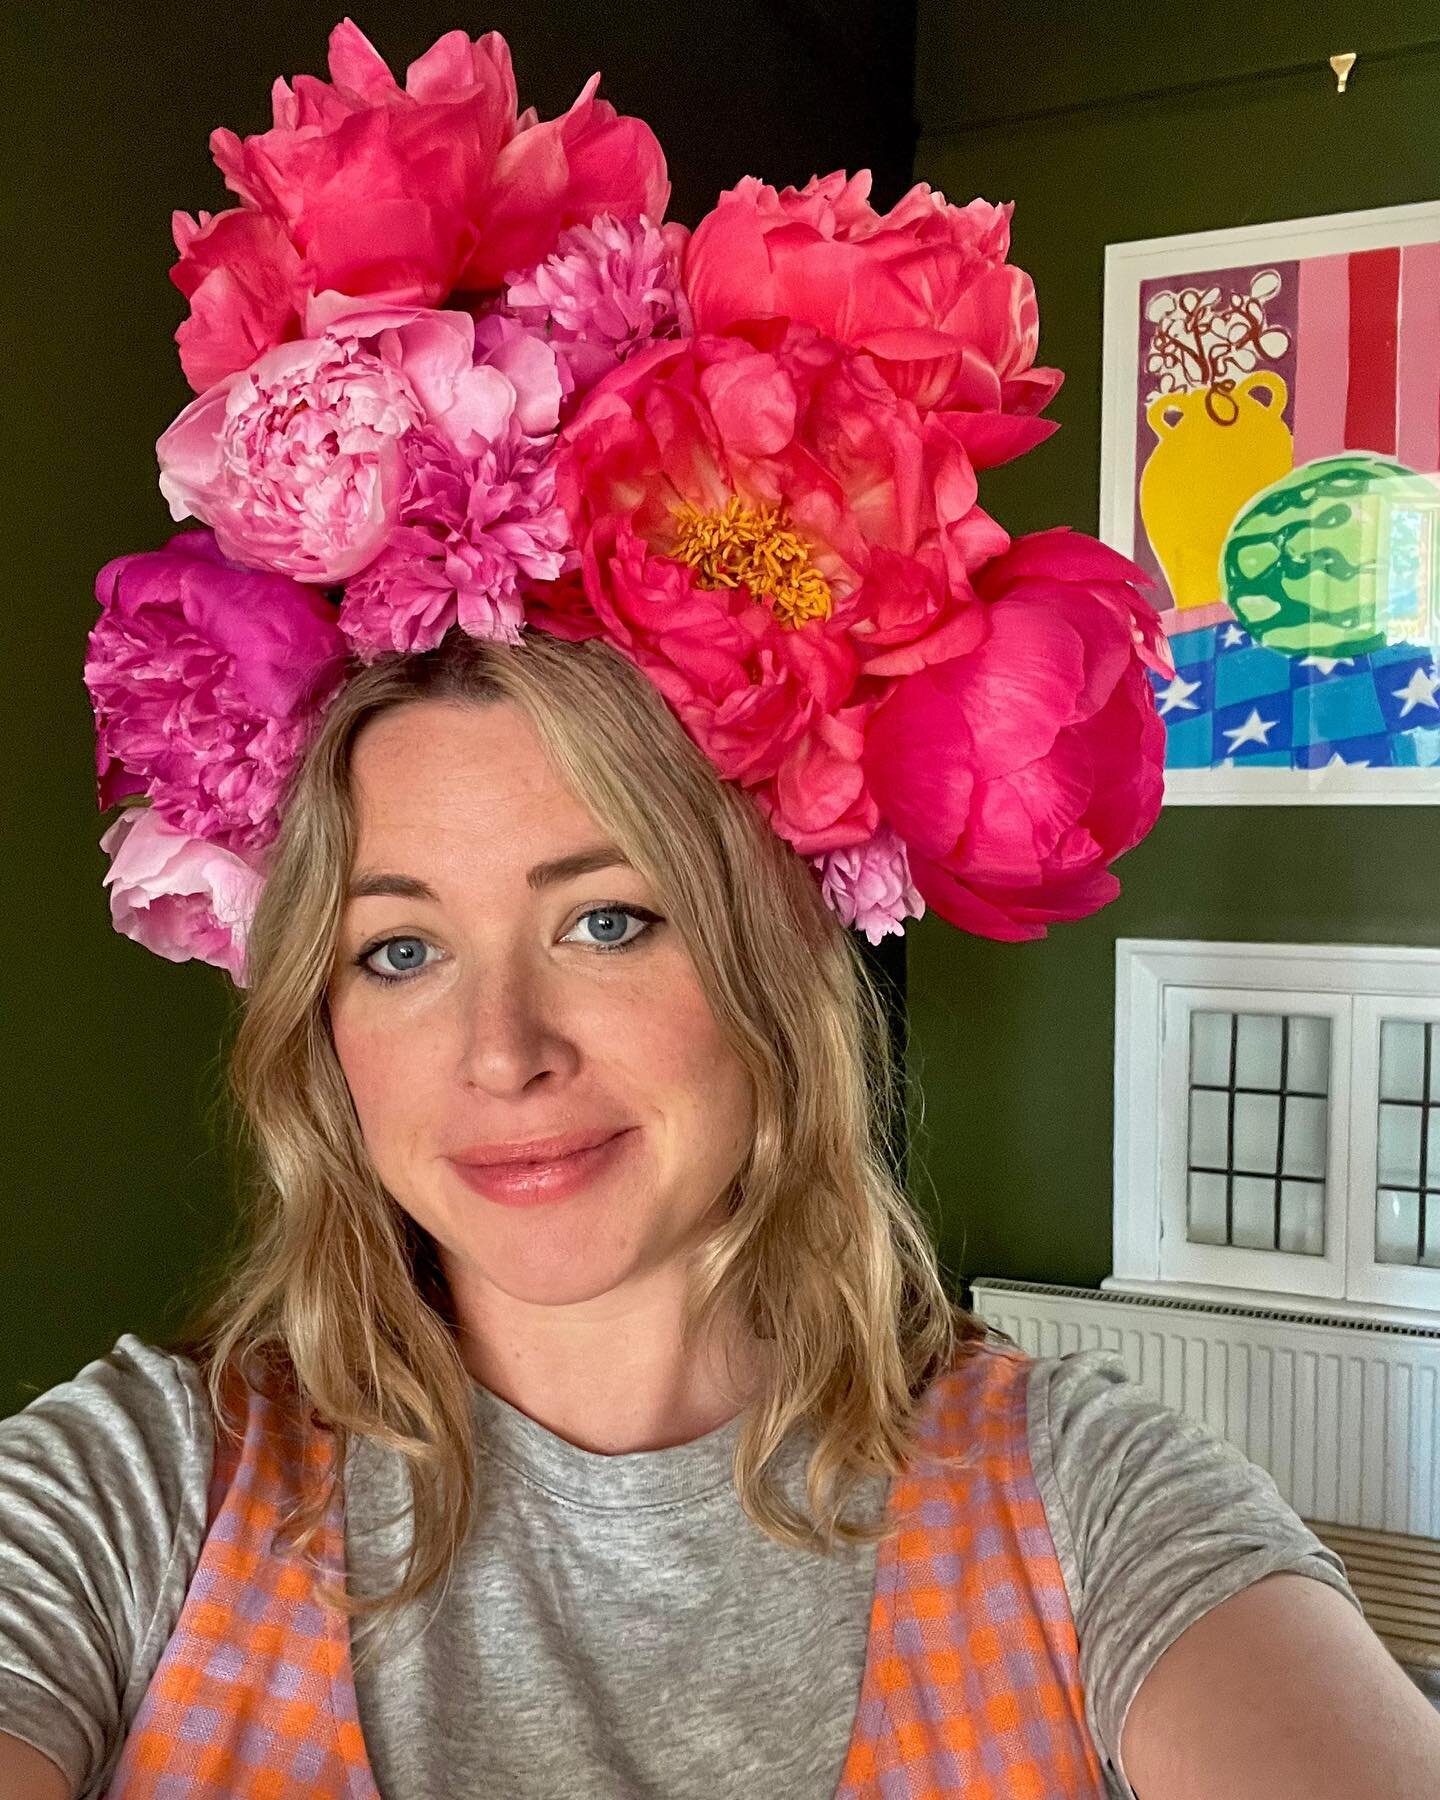 Hot, bothered and overdue so amusing myself by making a peony flower crown and taking selfies 🫠🫠🫠
⠀⠀⠀⠀⠀⠀⠀⠀⠀
⠀⠀⠀⠀⠀⠀⠀⠀⠀
#ultramarineflowers #ultramarinemargate #flowercrown #peonyflowercrown #juneflowers #margateflorist #floralstylist #hurryupbaby